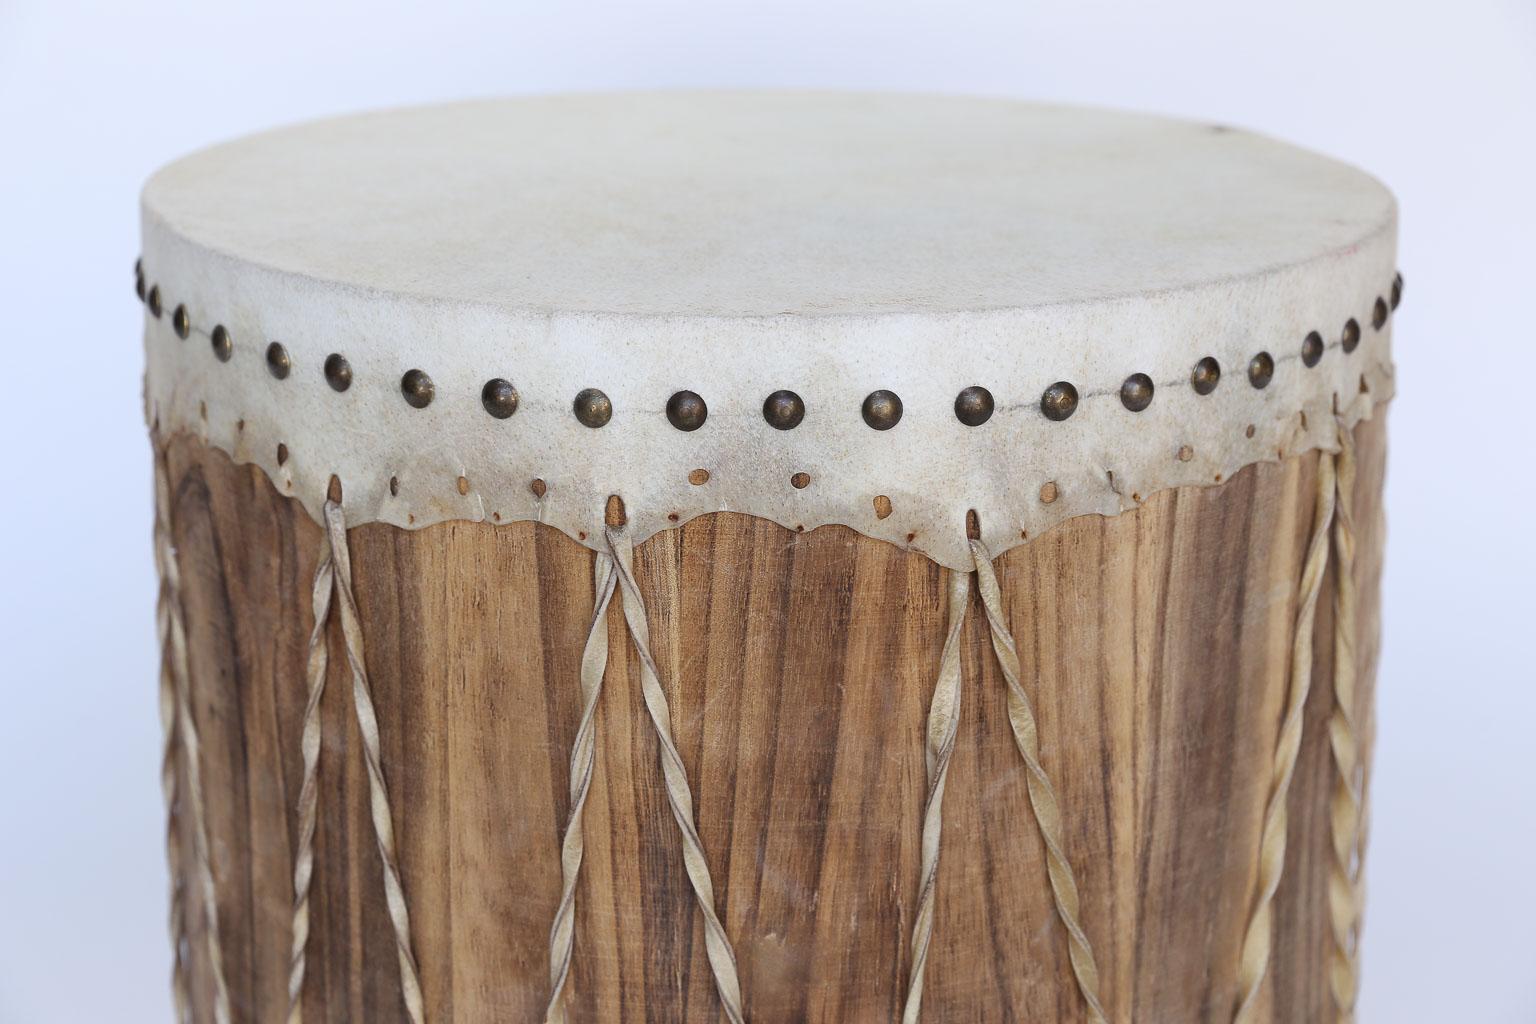 Found in England this vintage drum will add texture and conversation to your room. With a taupe leather top and bottom, the drum is finished with twisted straps and brass nail heads and could easily serve as an end or side table. Beat to your own